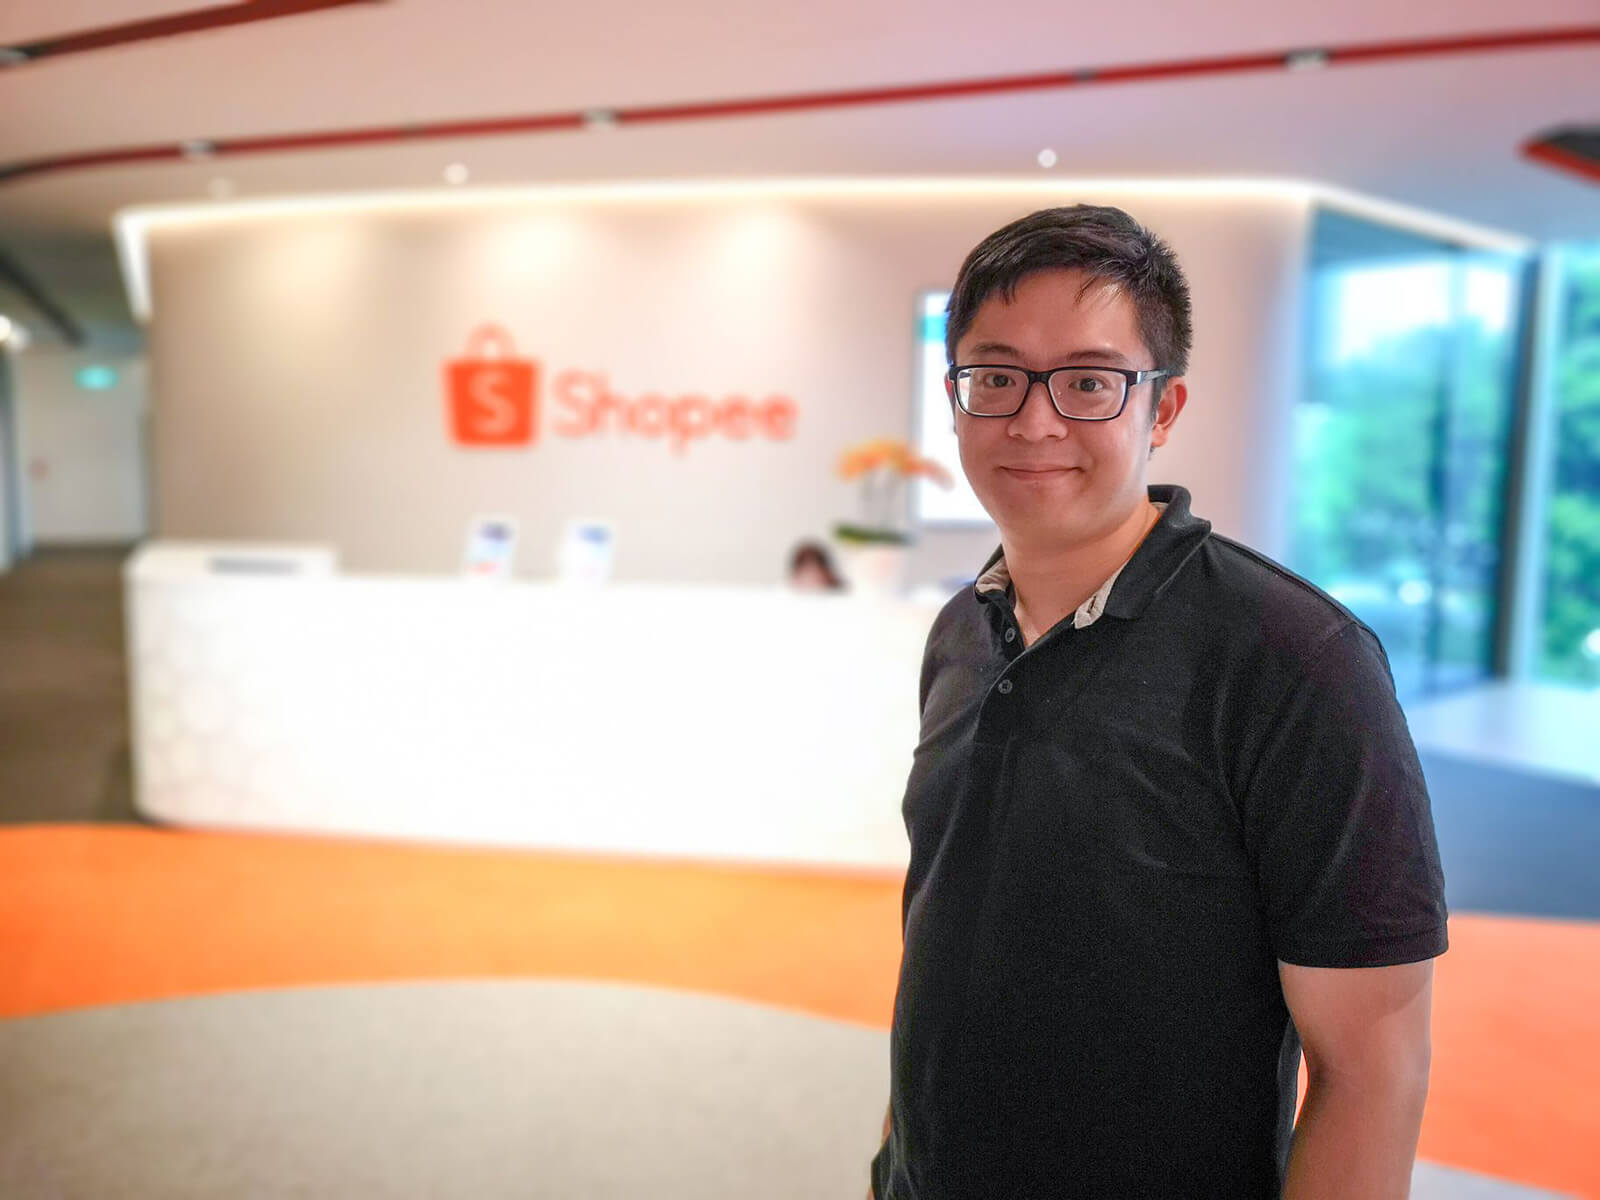 DigiPen (Singapore) alumnus Chester Liew stands in front of a wall adorned with the Shopee logo